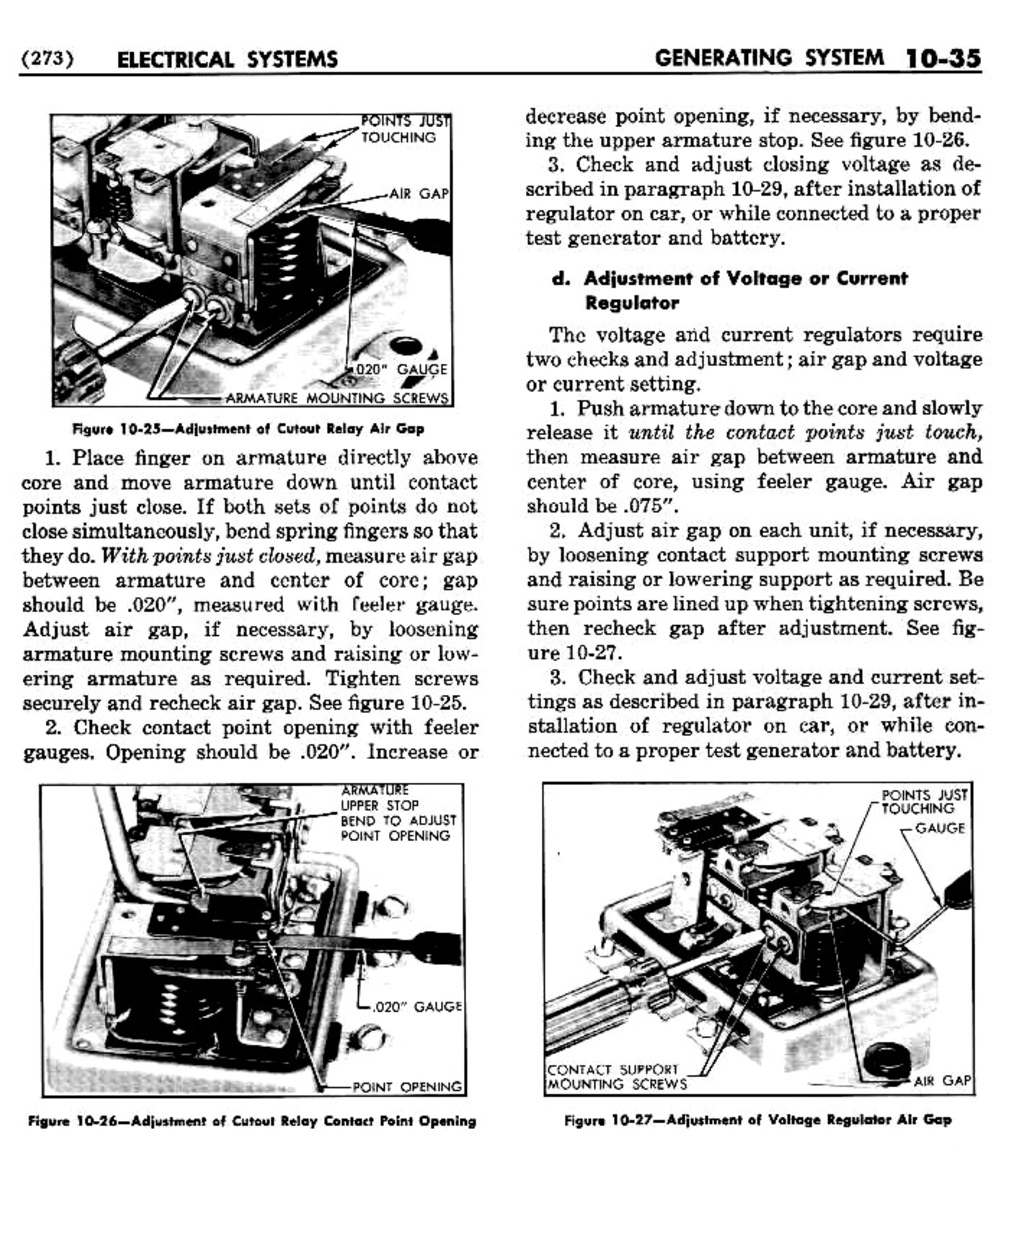 n_11 1950 Buick Shop Manual - Electrical Systems-035-035.jpg